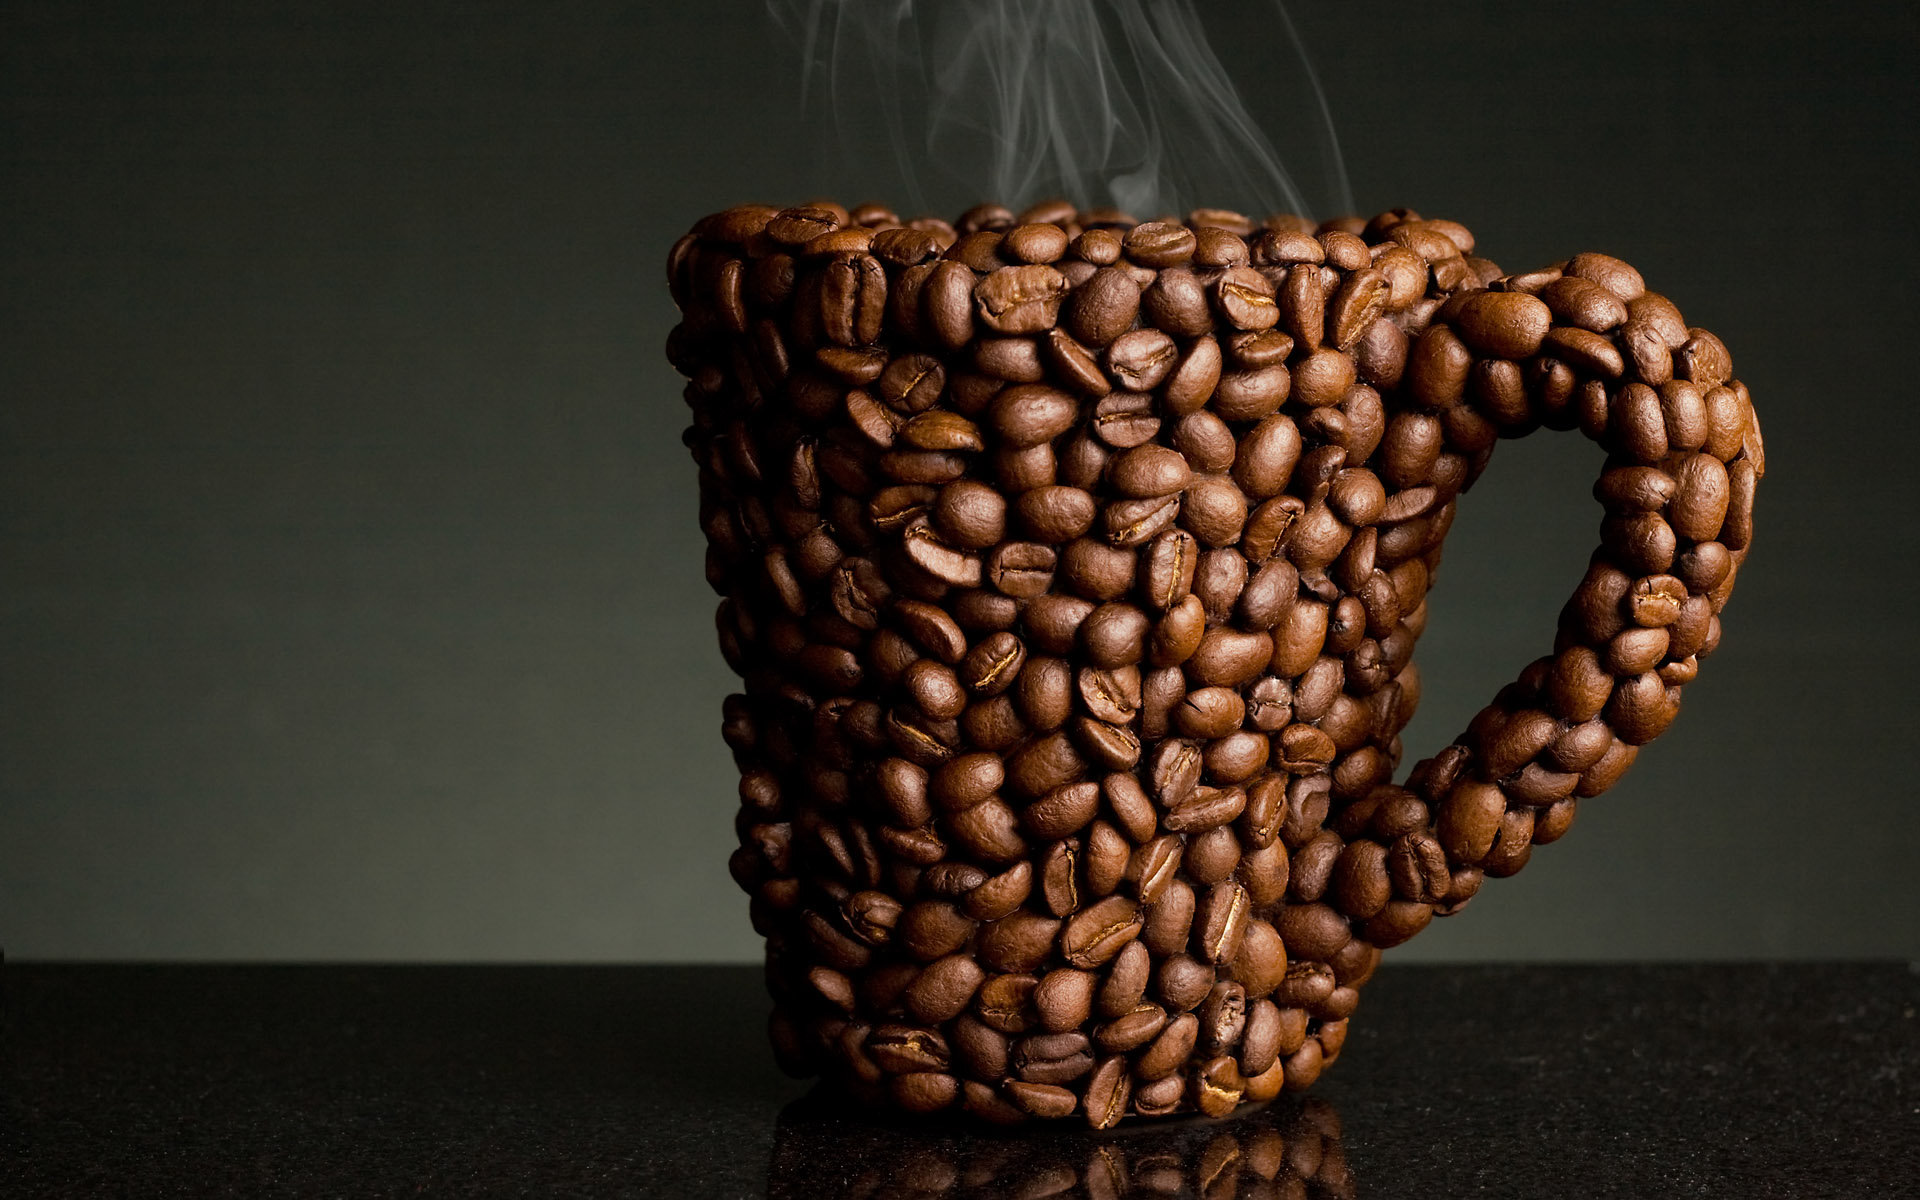 Wallpapers Free Coffee Cup Hd Wallpapers Coffee Beans Wallpapers